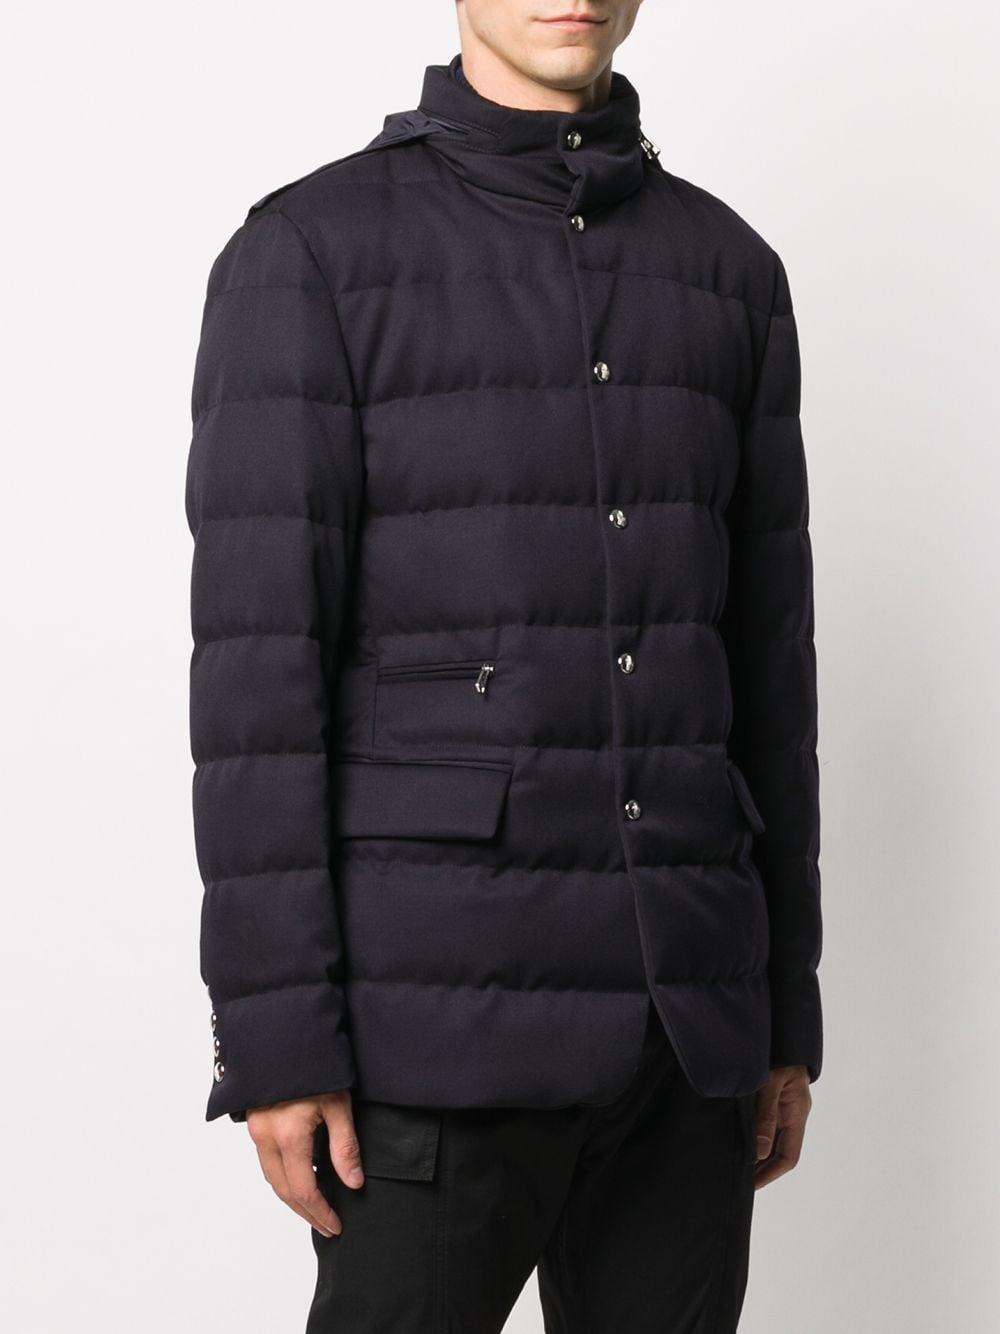 Moncler Wool Bess Padded Jacket in Blue for Men - Lyst